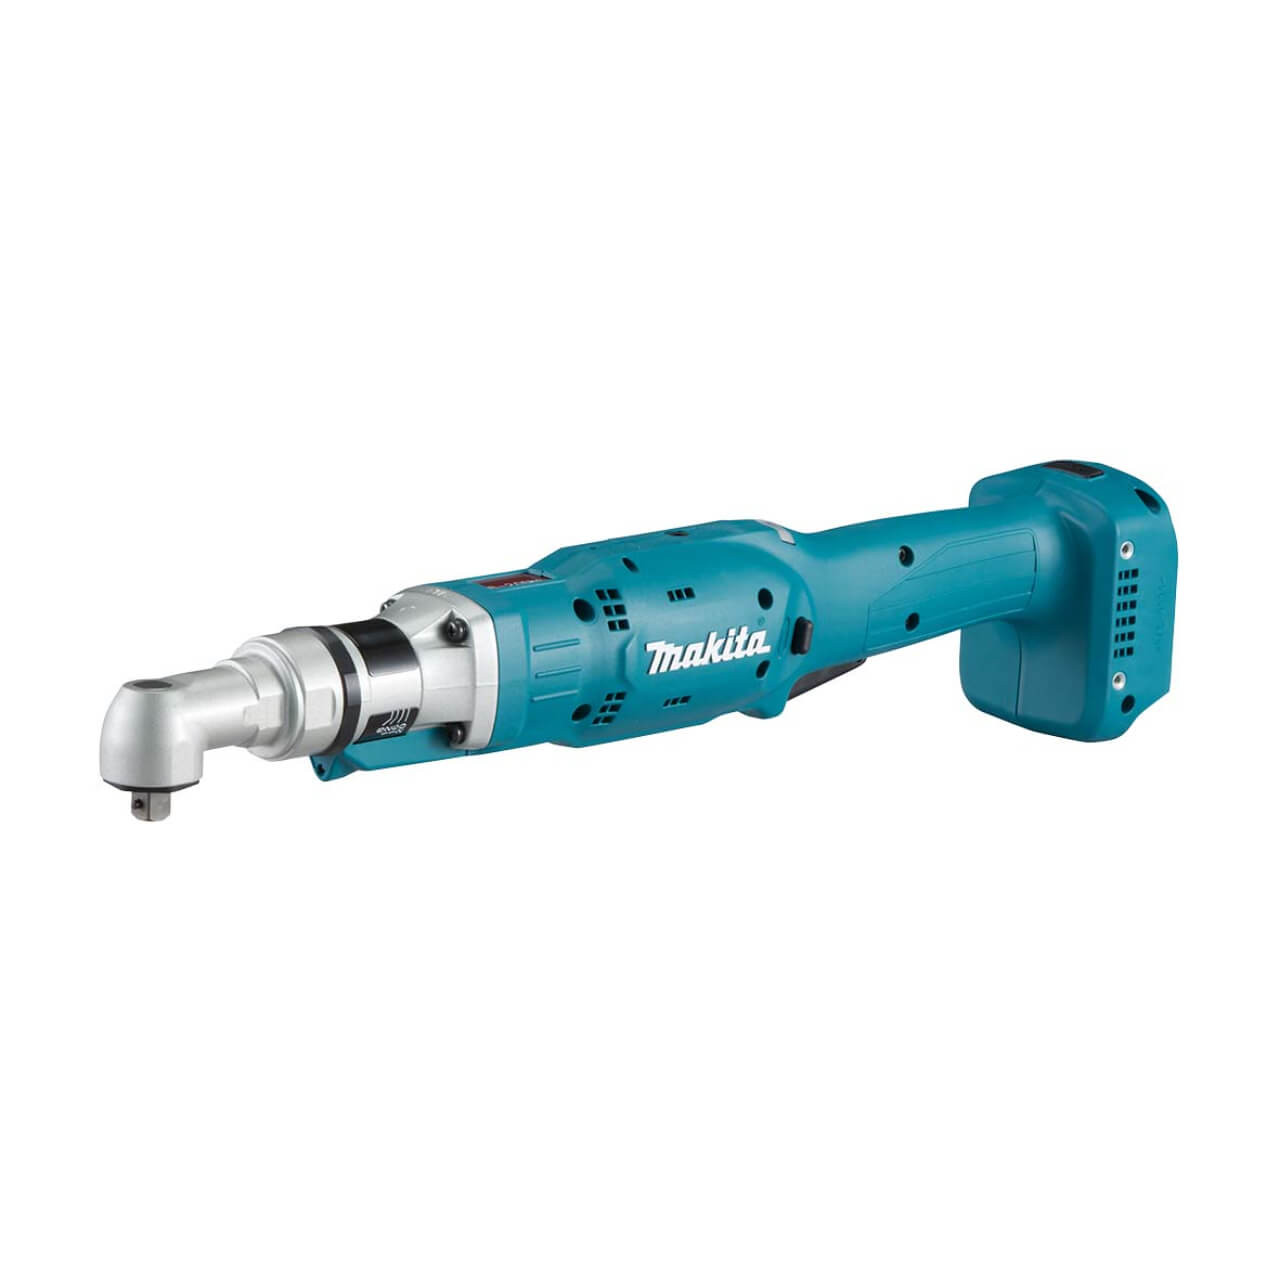 Makita 14.4V BRUSHLESS 3/8” Angled Torque Wrench. 8-20Nm. 100-440rpm - Tool Only